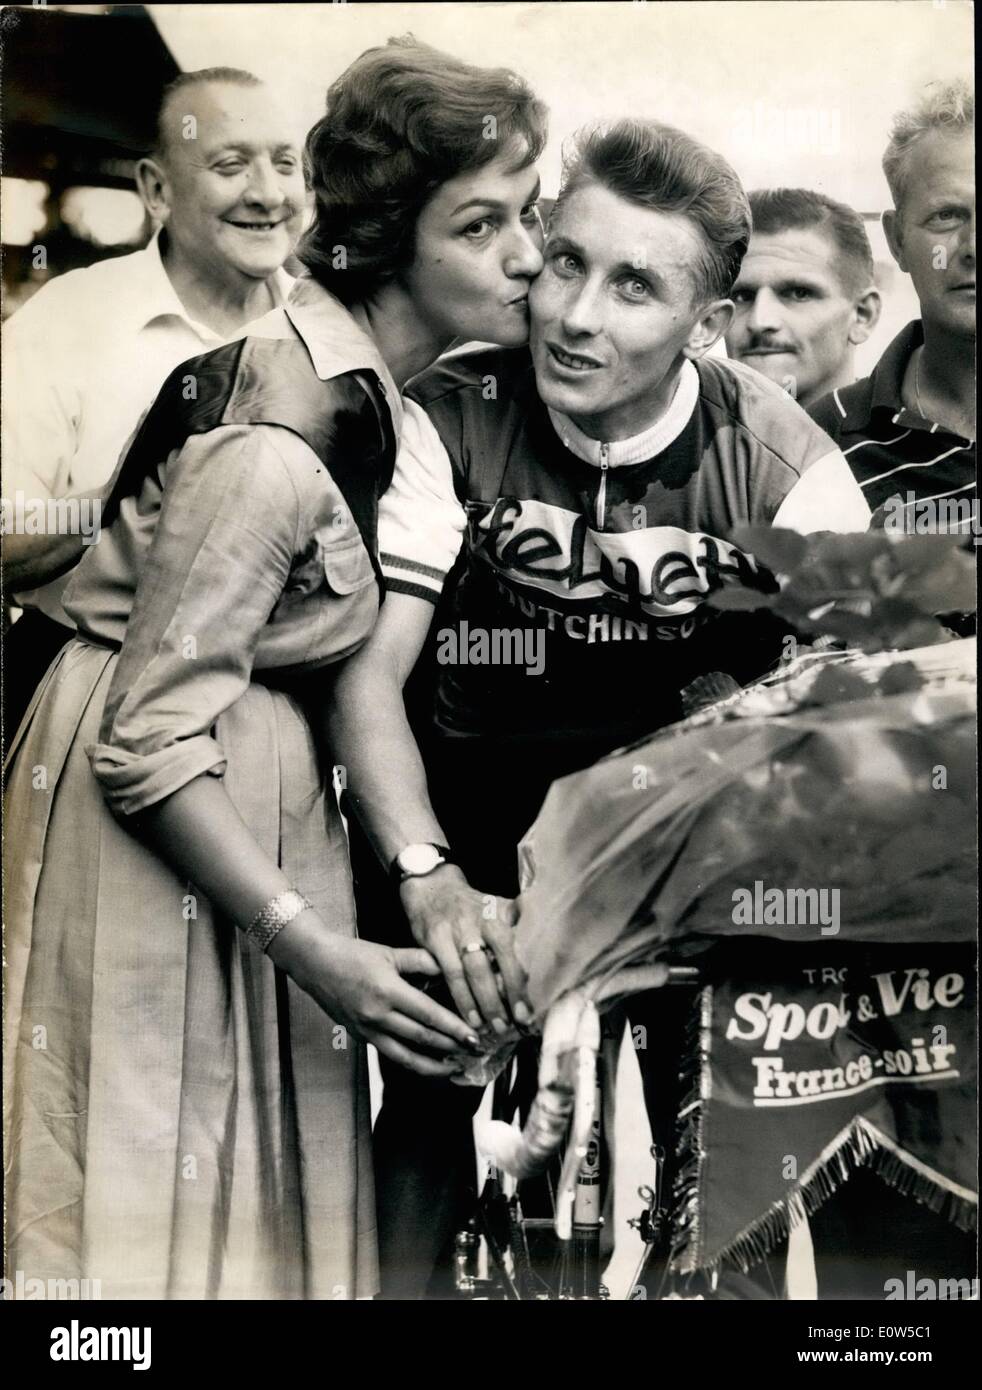 Sep. 09, 1961 - Aquetil Wins in Brand Prix Des Nations: Famous French Cyclist Jacques Anquetil scored a Brilliant Victory in the Grand Prix Des Nations, A Race over a Distance of 100 Km. which he covered in 2 hours 2'' 38.'' Picture Shows: Jacques Anquetil after his victory. Stock Photo